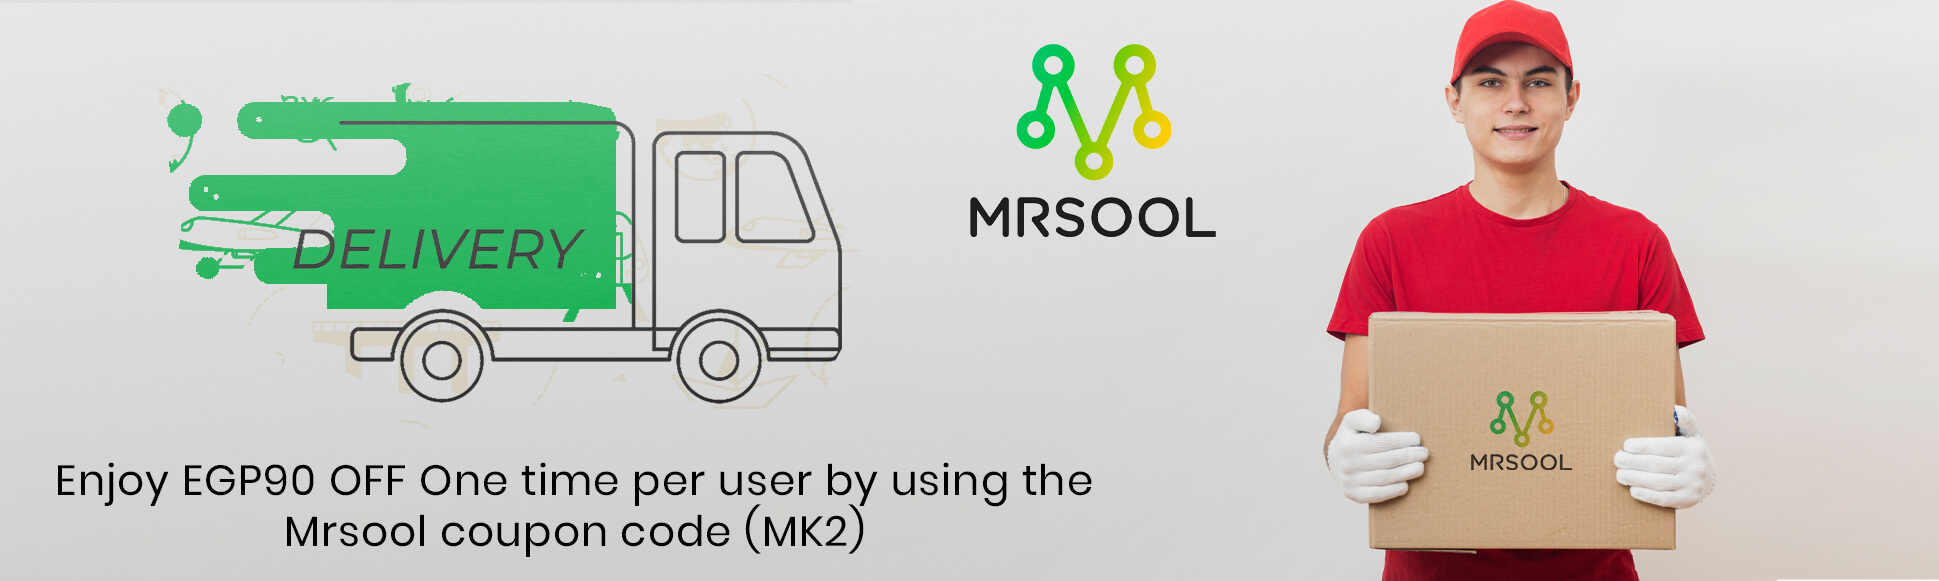 mrsool free delivery code